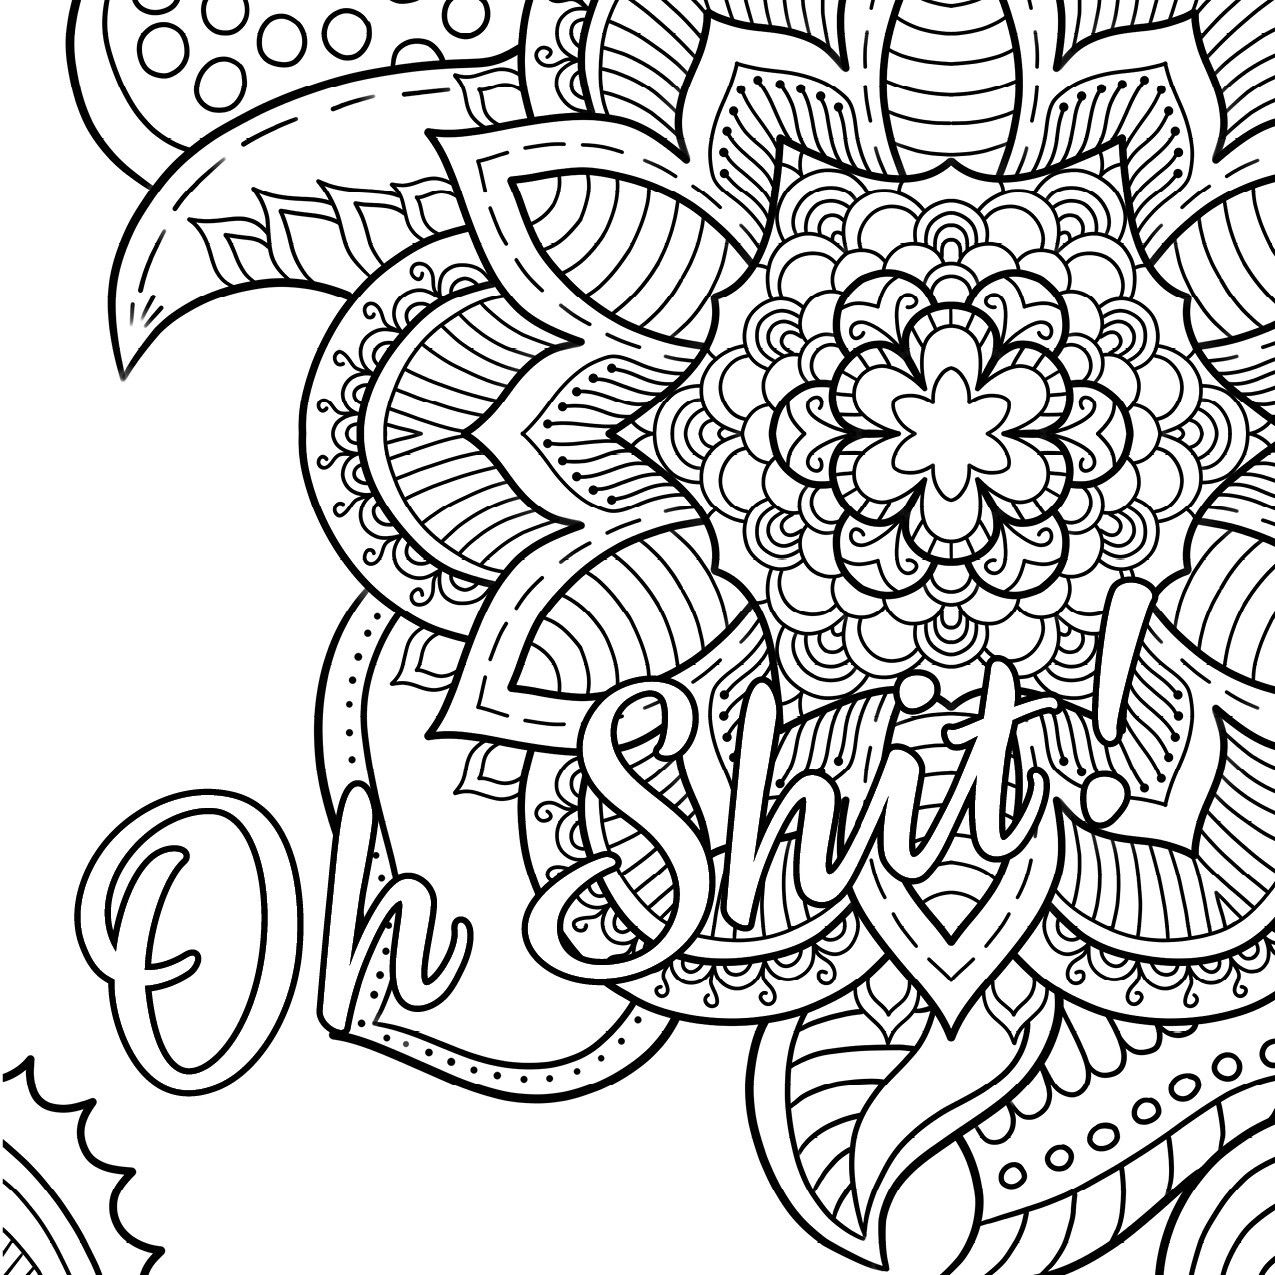 Swear Word Coloring Book 2 Free Printable Coloring Pages 